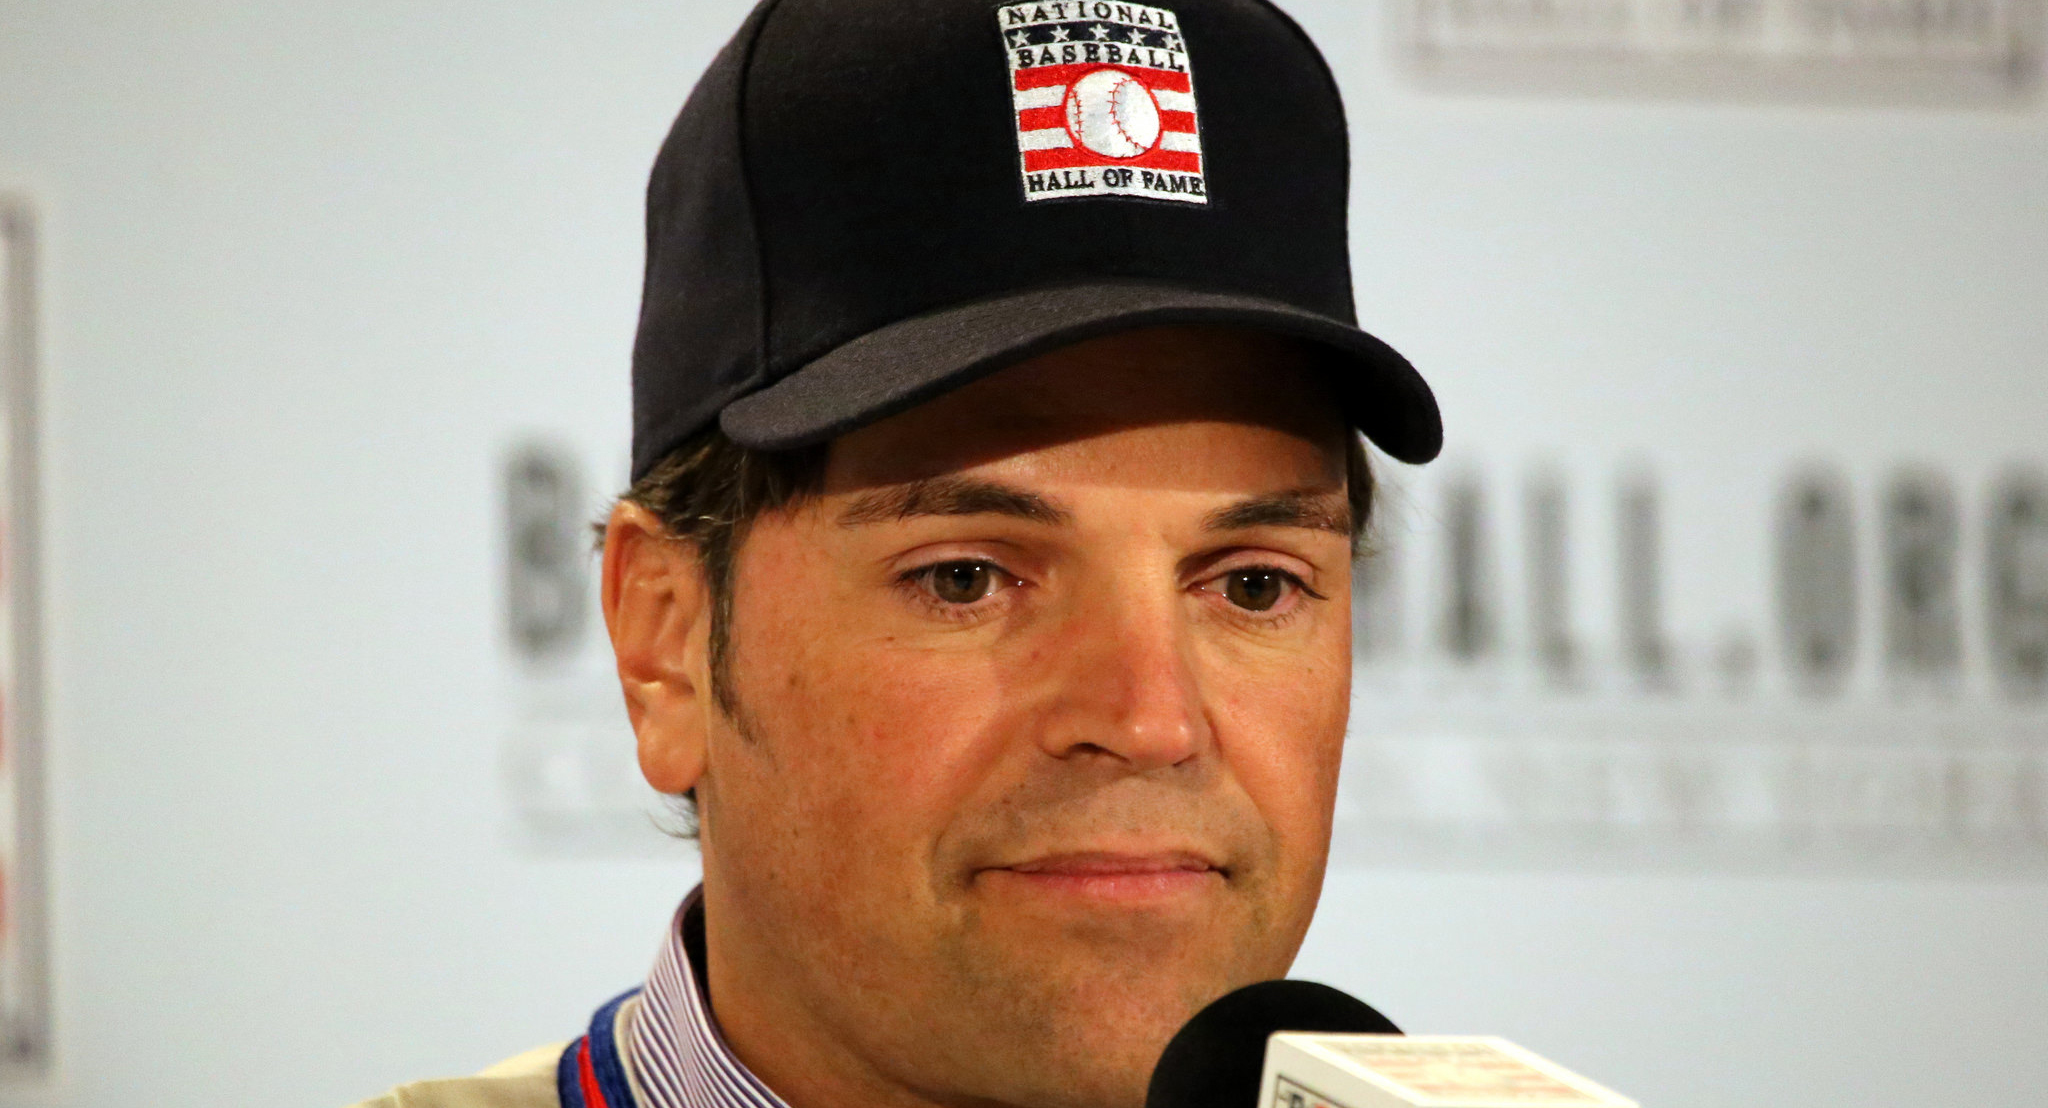 Ranking the 2013 Hall of Fame candidates: No. 4, Mike Piazza